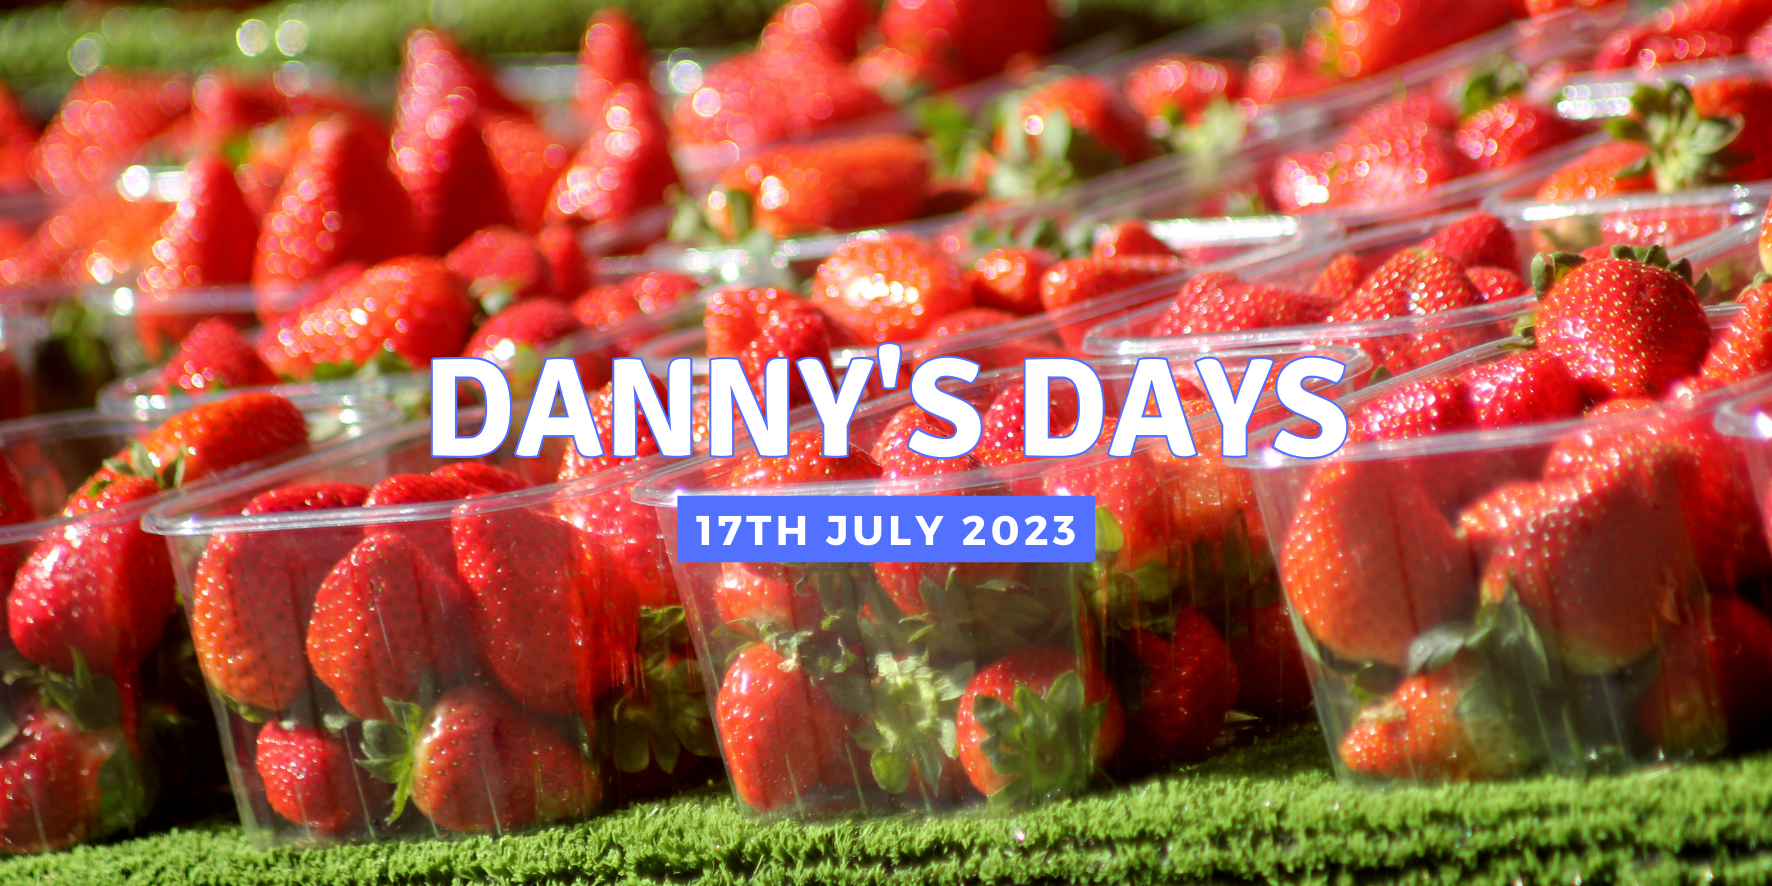 Danny's Days - 17th July 2023